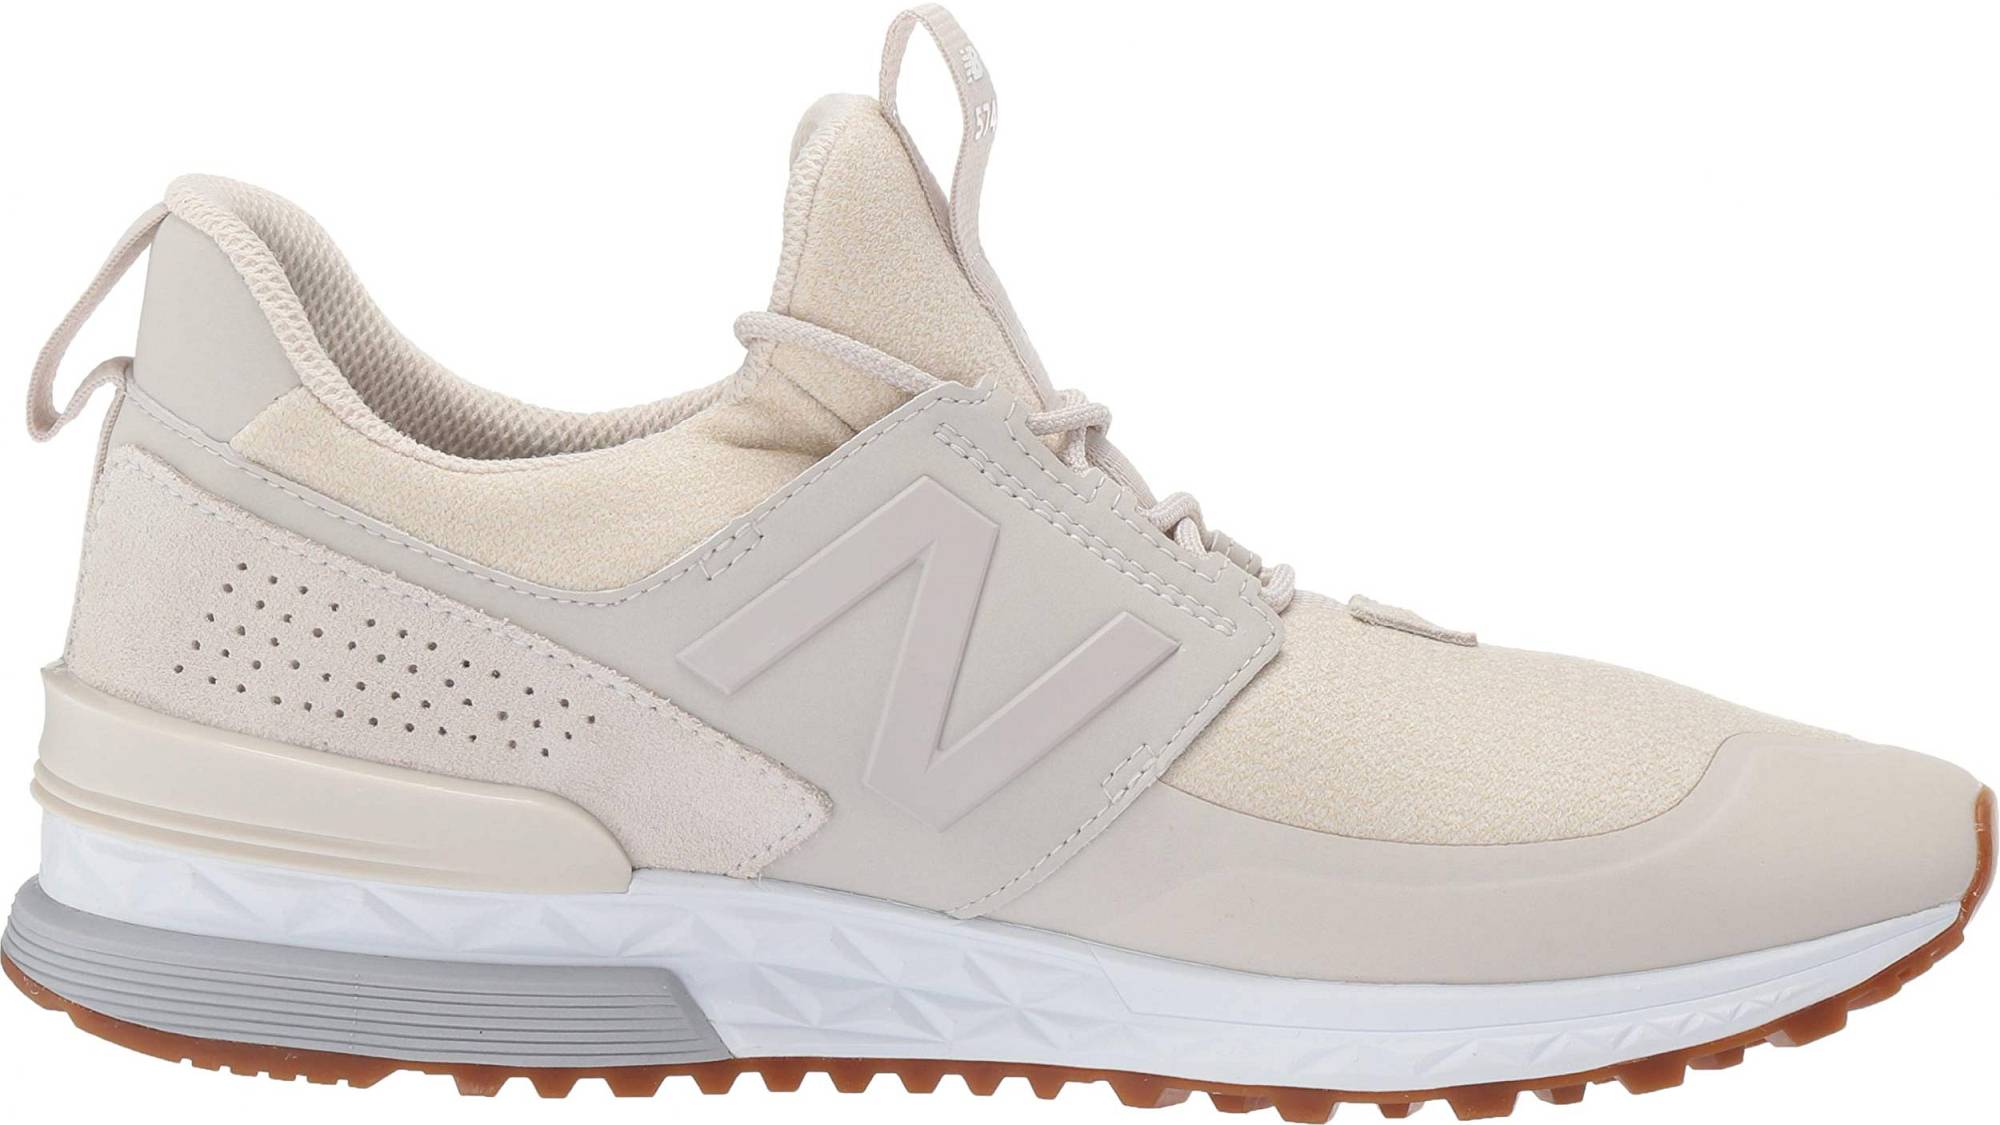 New Balance 574 Sport – Shoes Reviews & Reasons To Buy